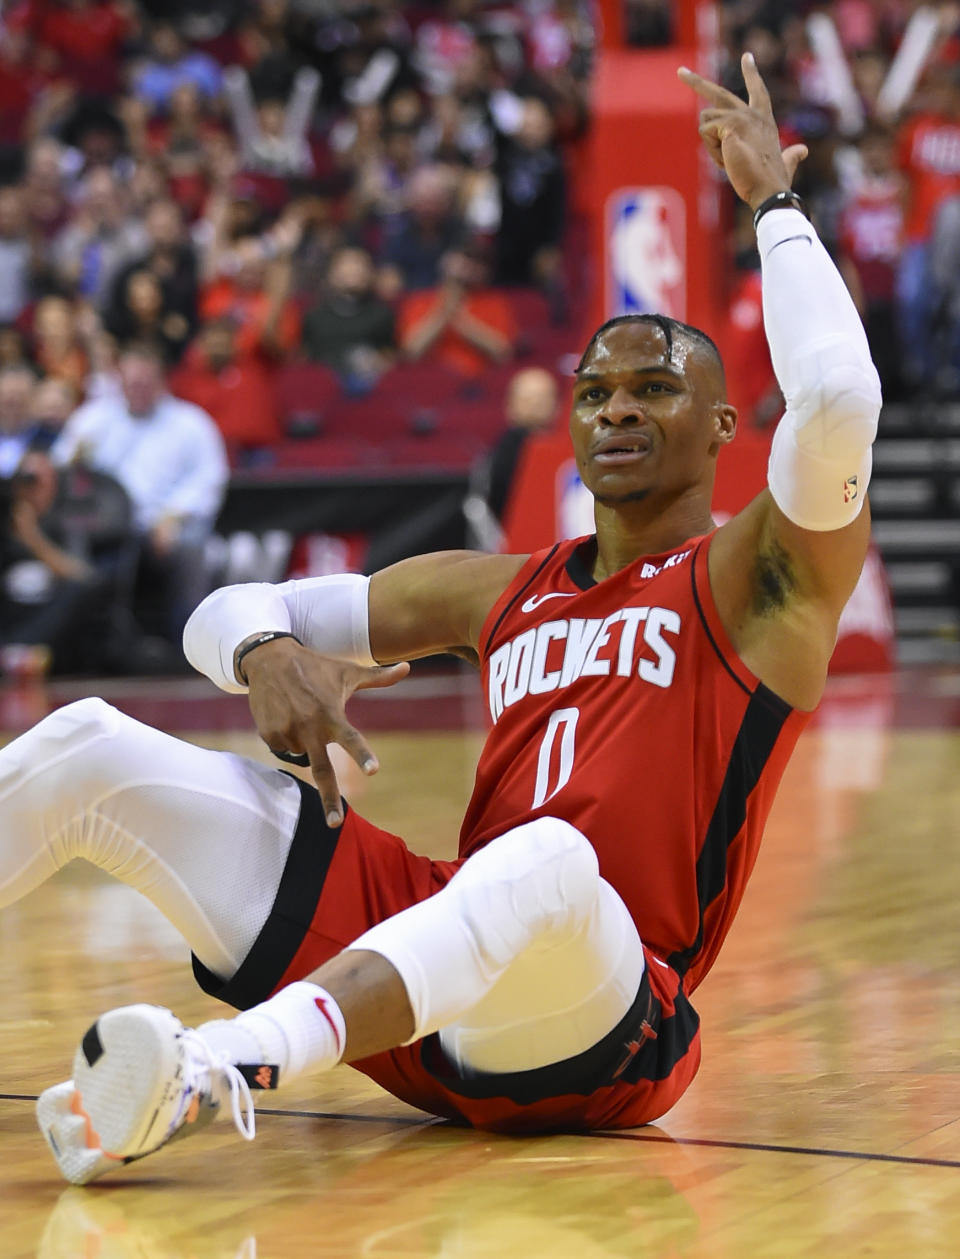 Houston Rockets guard Russell Westbrook reacts after making a 3-point basket during the first half of the team's NBA basketball game against the Milwaukee Bucks, Thursday, Oct. 24, 2019, in Houston. (AP Photo/Eric Christian Smith)